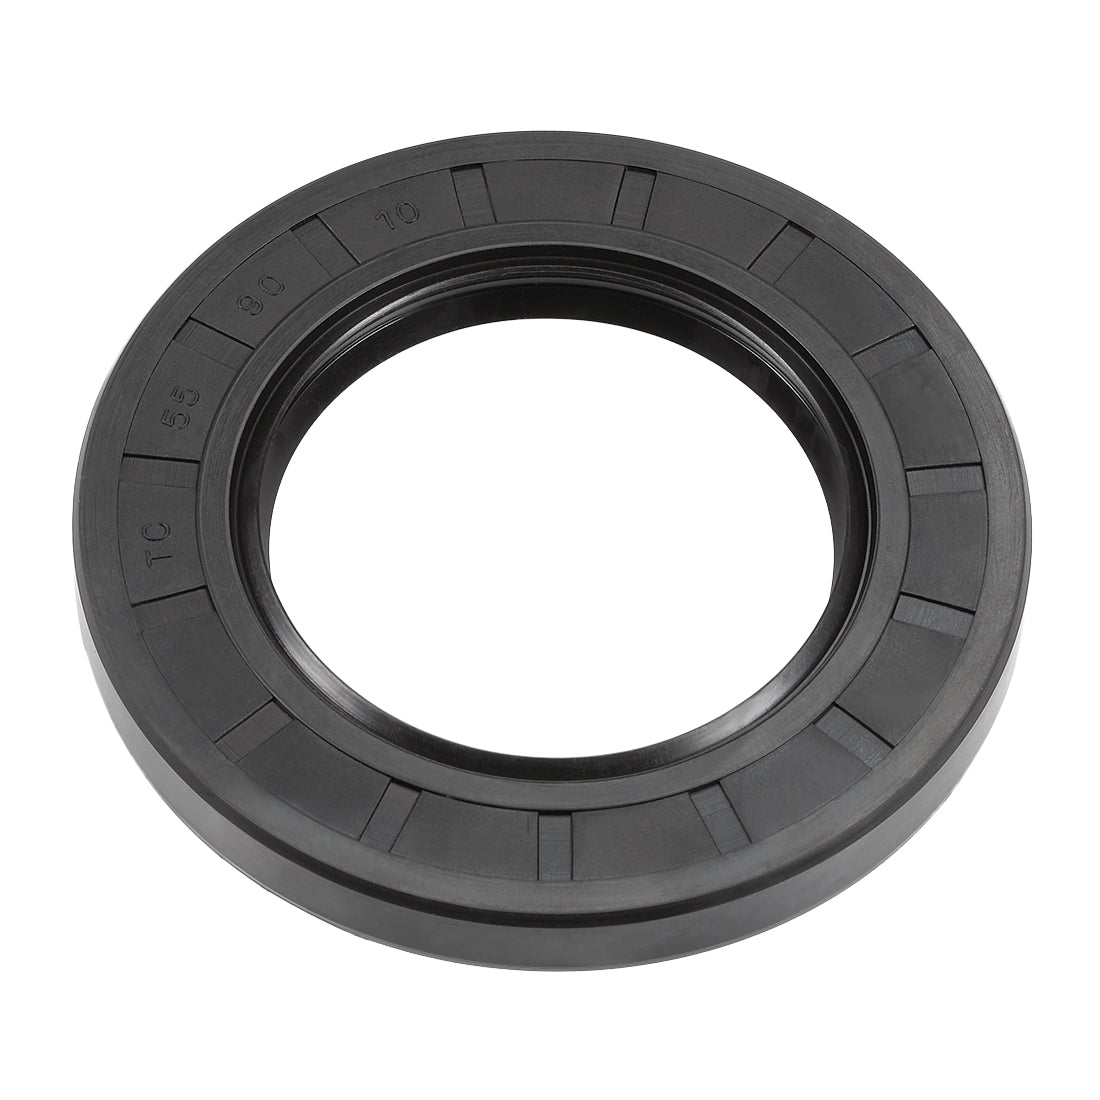 Uxcell Uxcell Oil Seal, TC 52mm x 72mm x 10mm, Nitrile Rubber Cover Double Lip